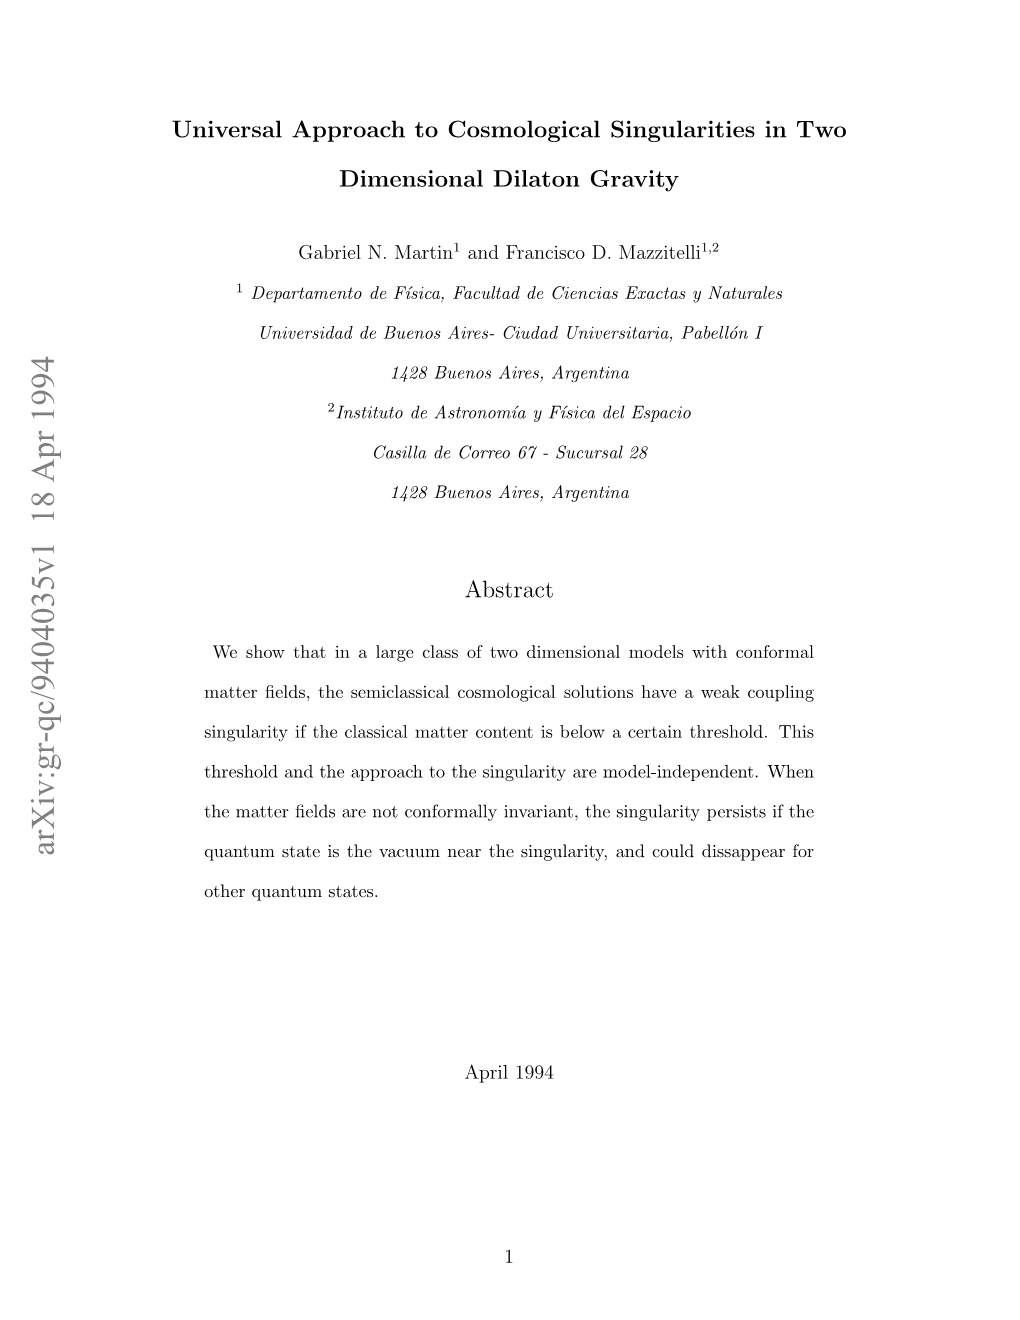 Universal Approach to Cosmological Singularities in Two Dimensional